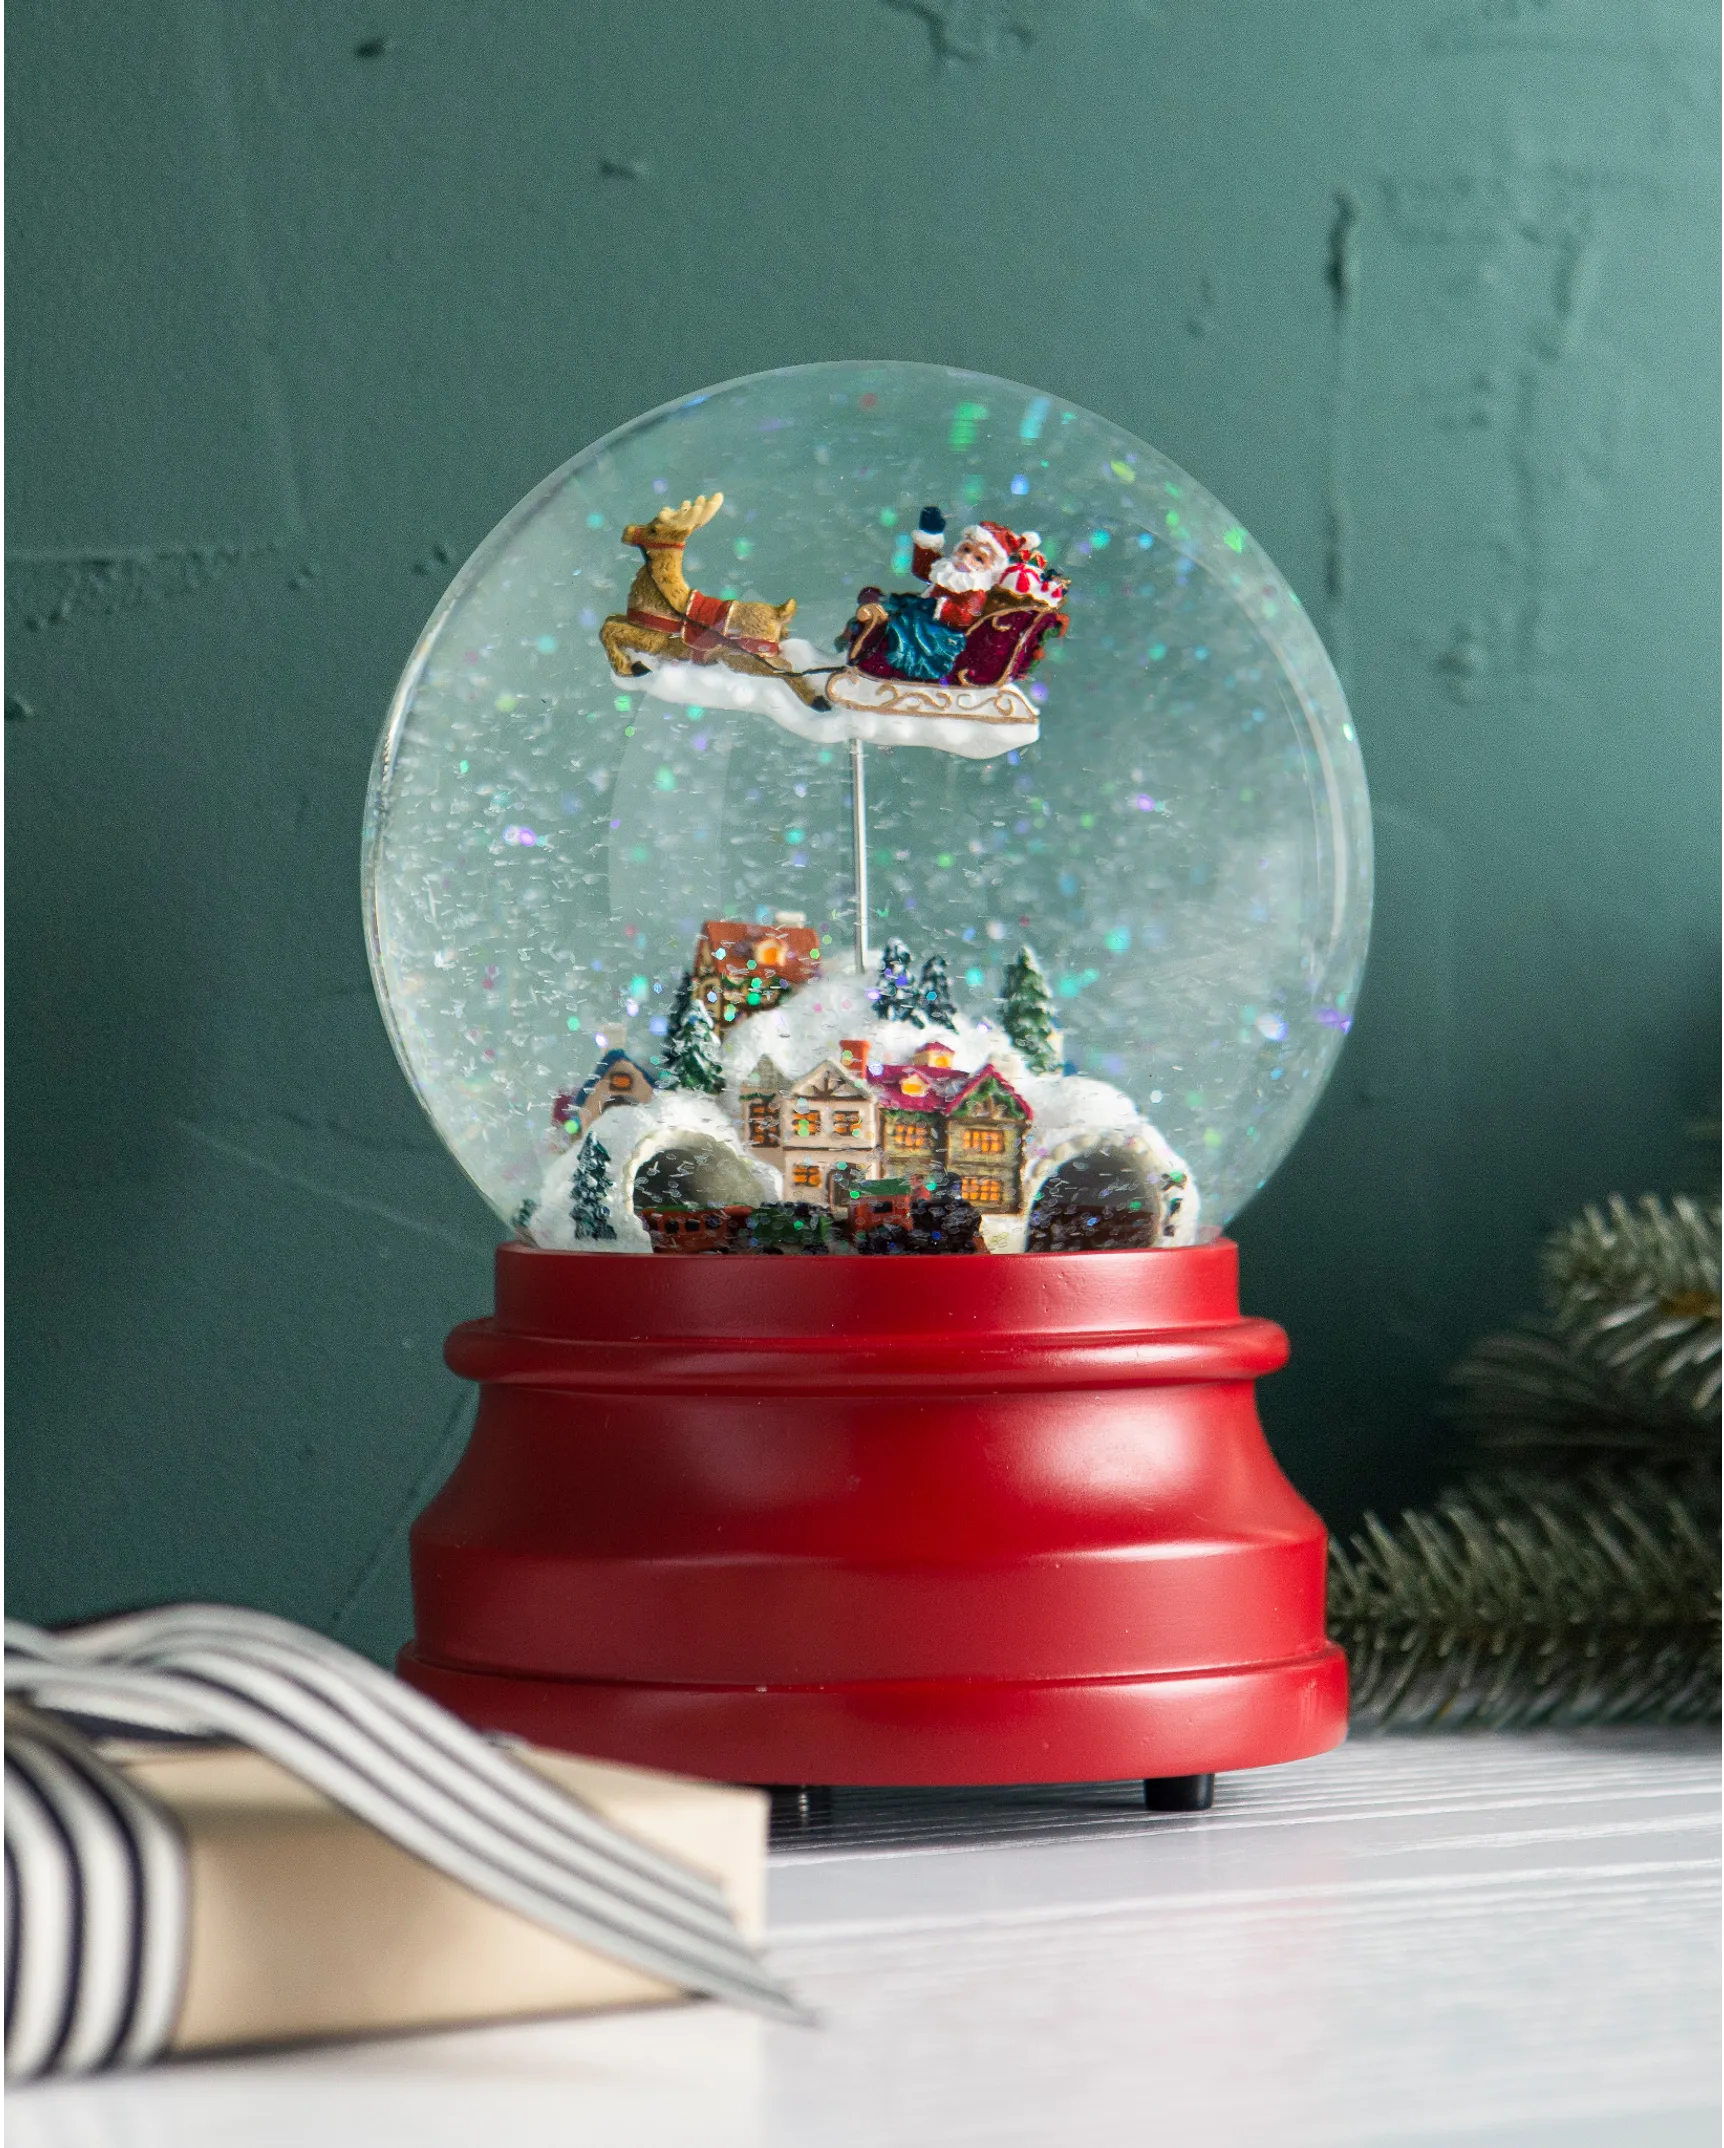 Santa Jack Christmas Night musical snowglobe from our Snowglobes